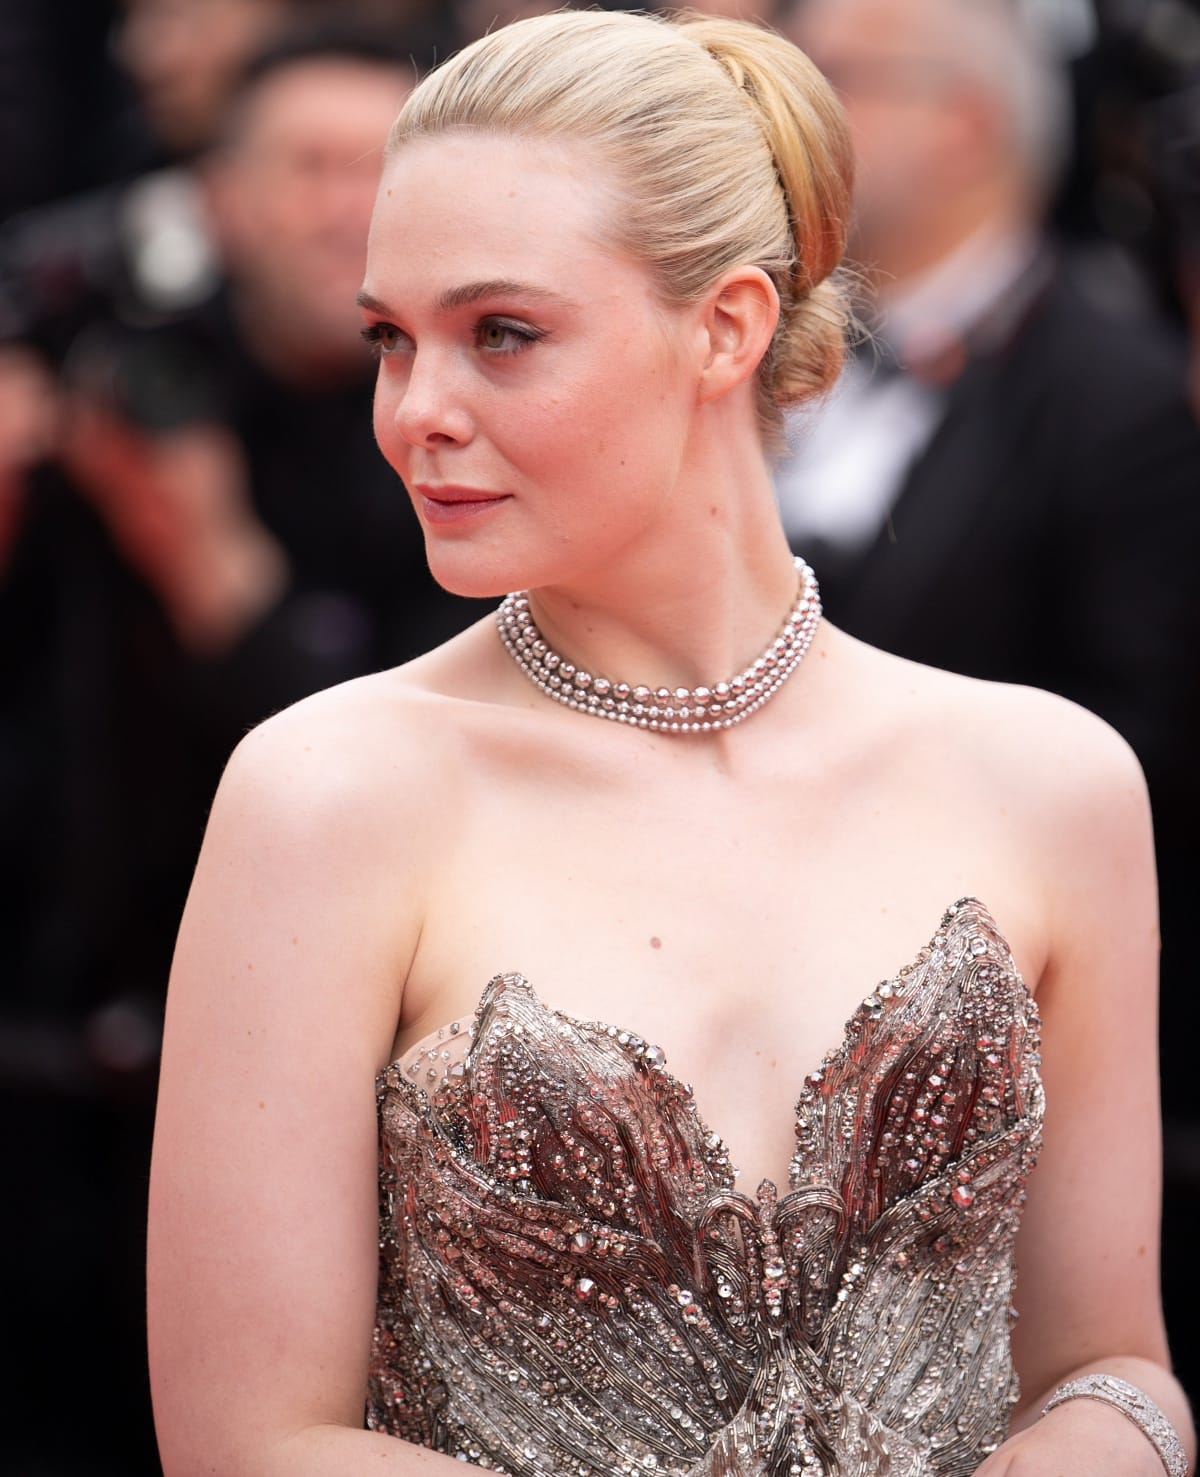 Elle Fanning’s stunning Cartier jewels perfectly complemented her custom Alexander McQueen gown